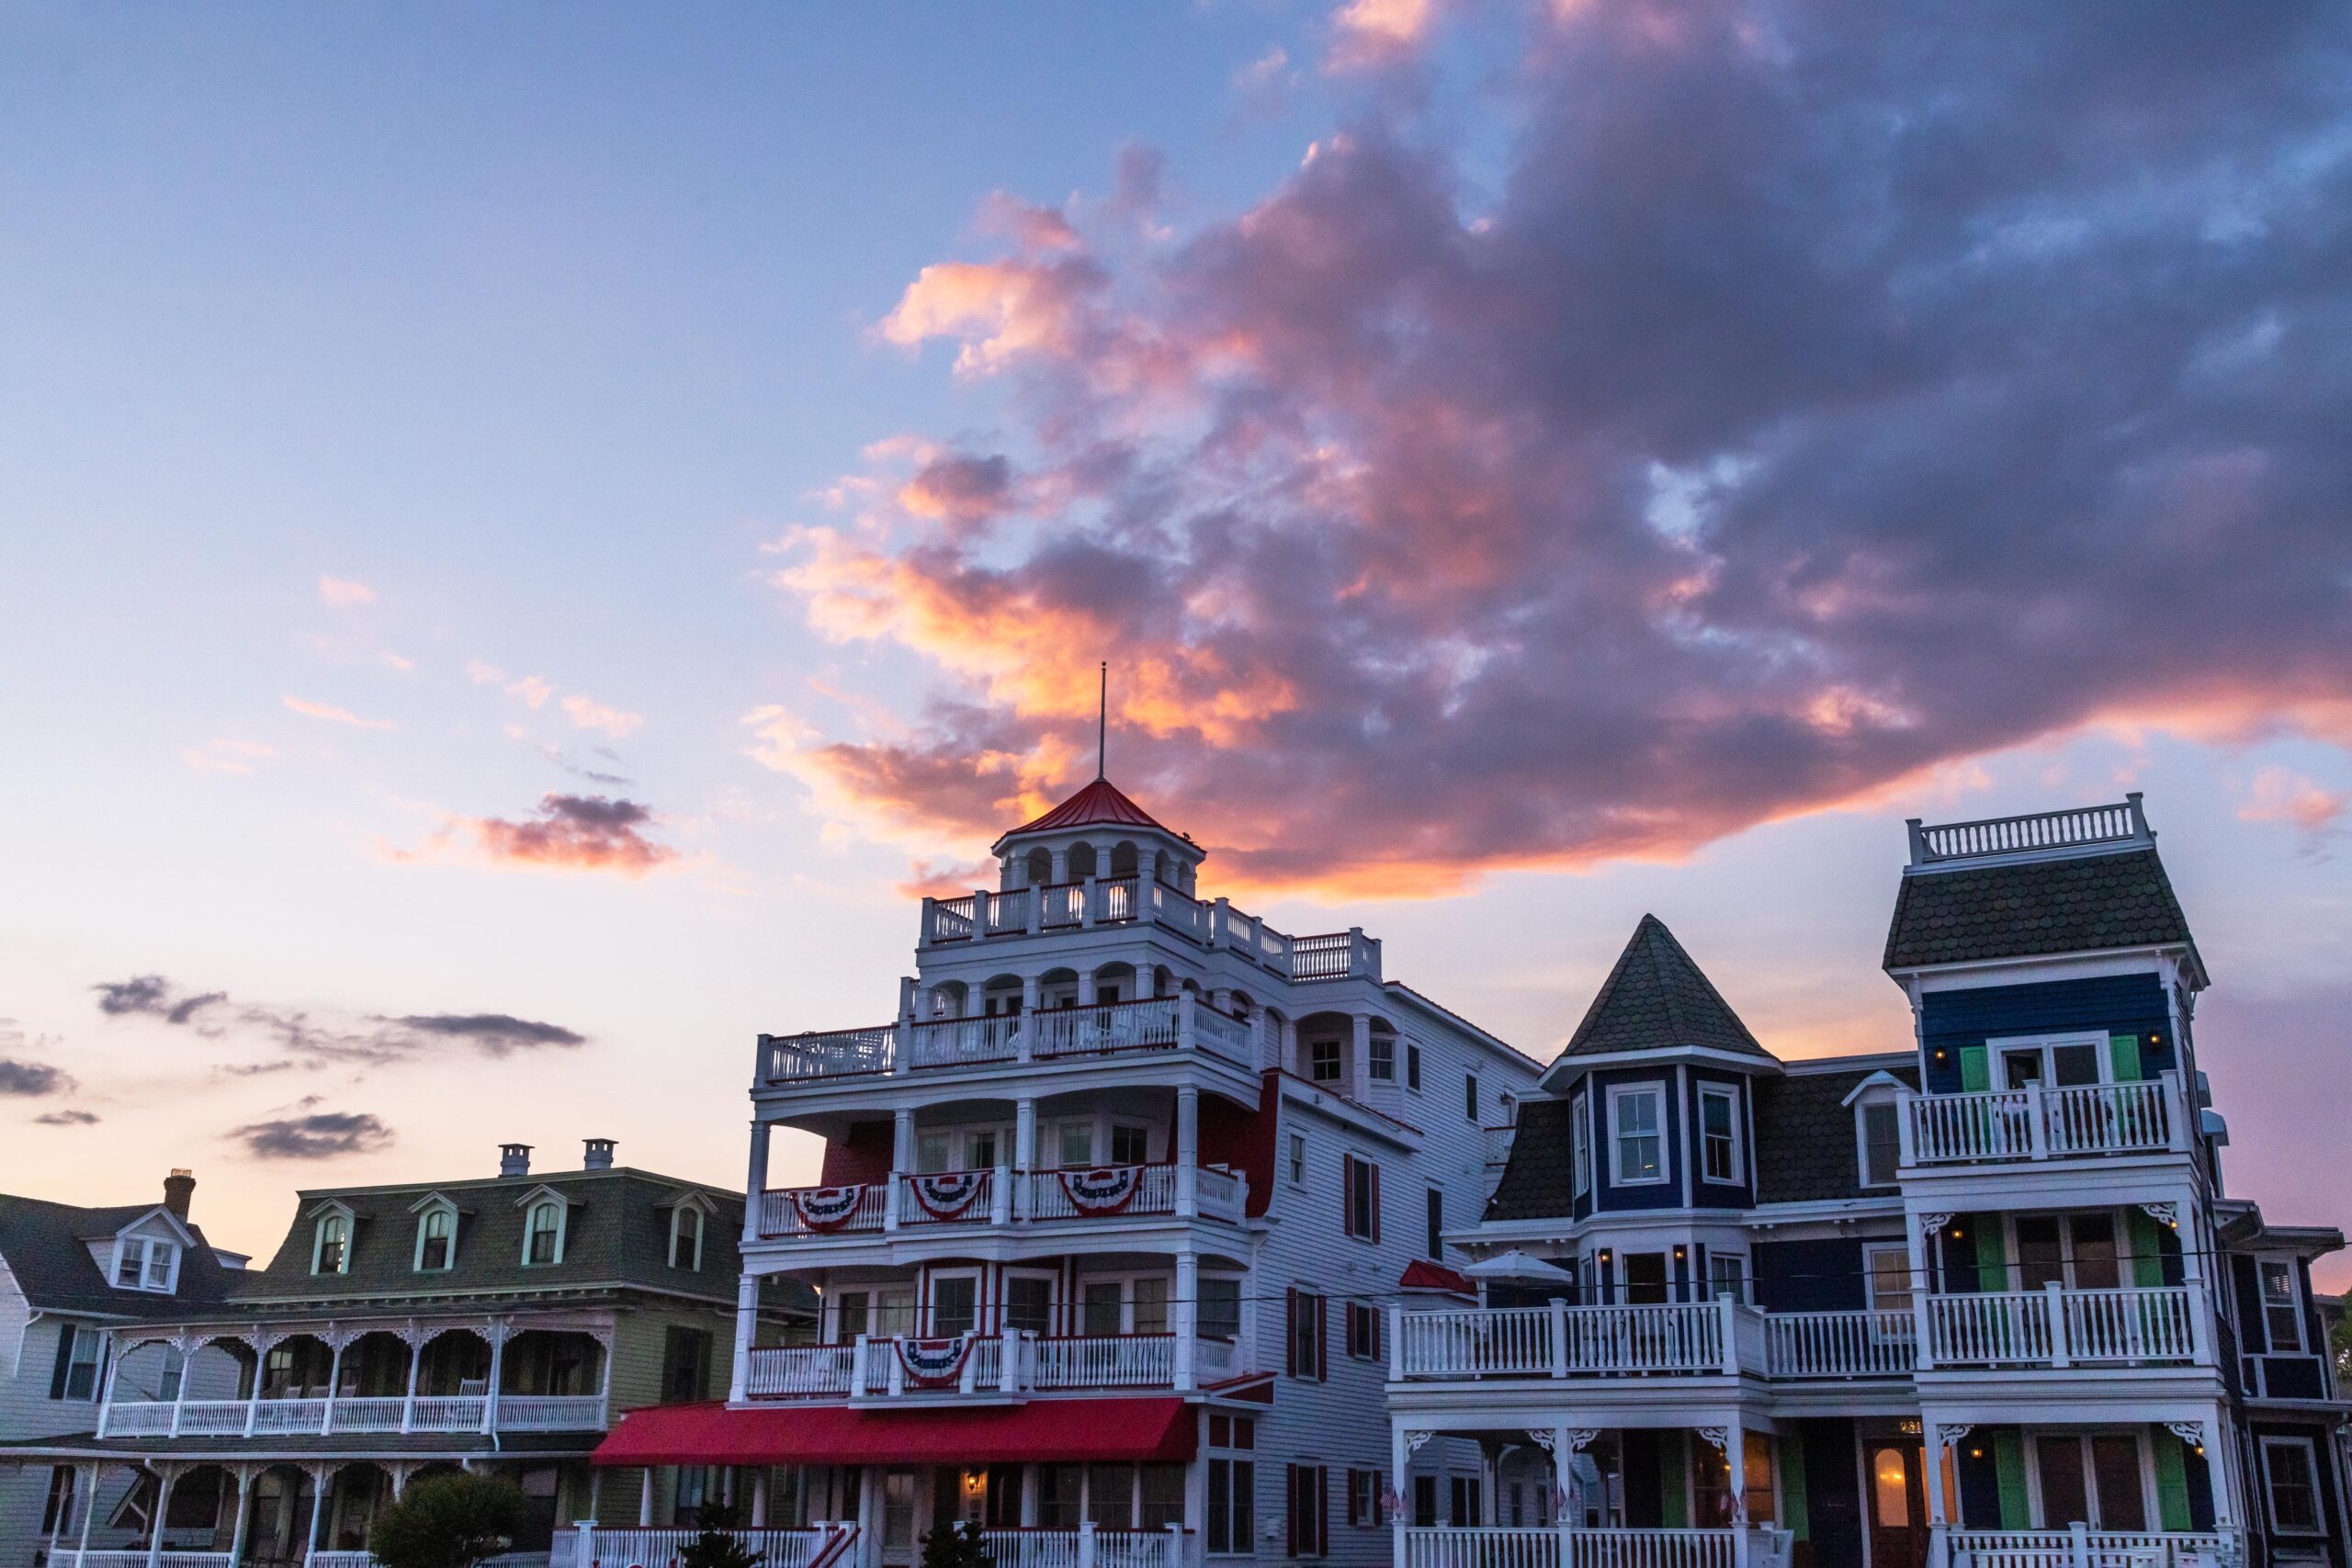 Victorian houses on Beach Avenue with a pink, purple, and blue cloud in the sky at sunset